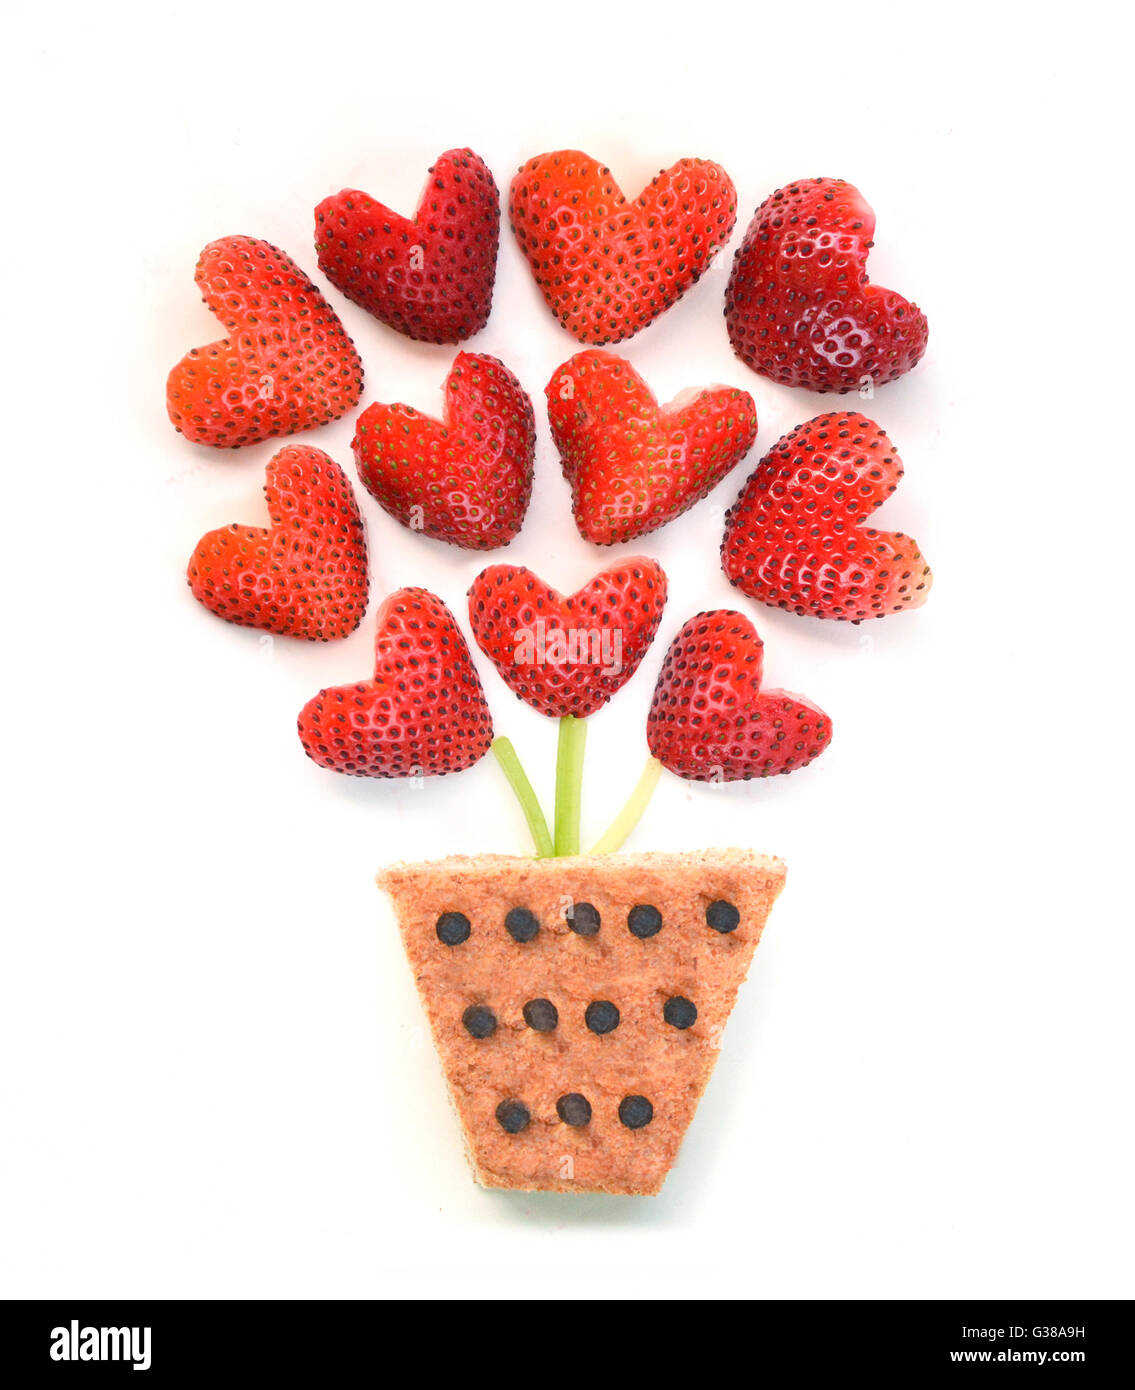 Strawberries in a flower pot concept Stock Photo